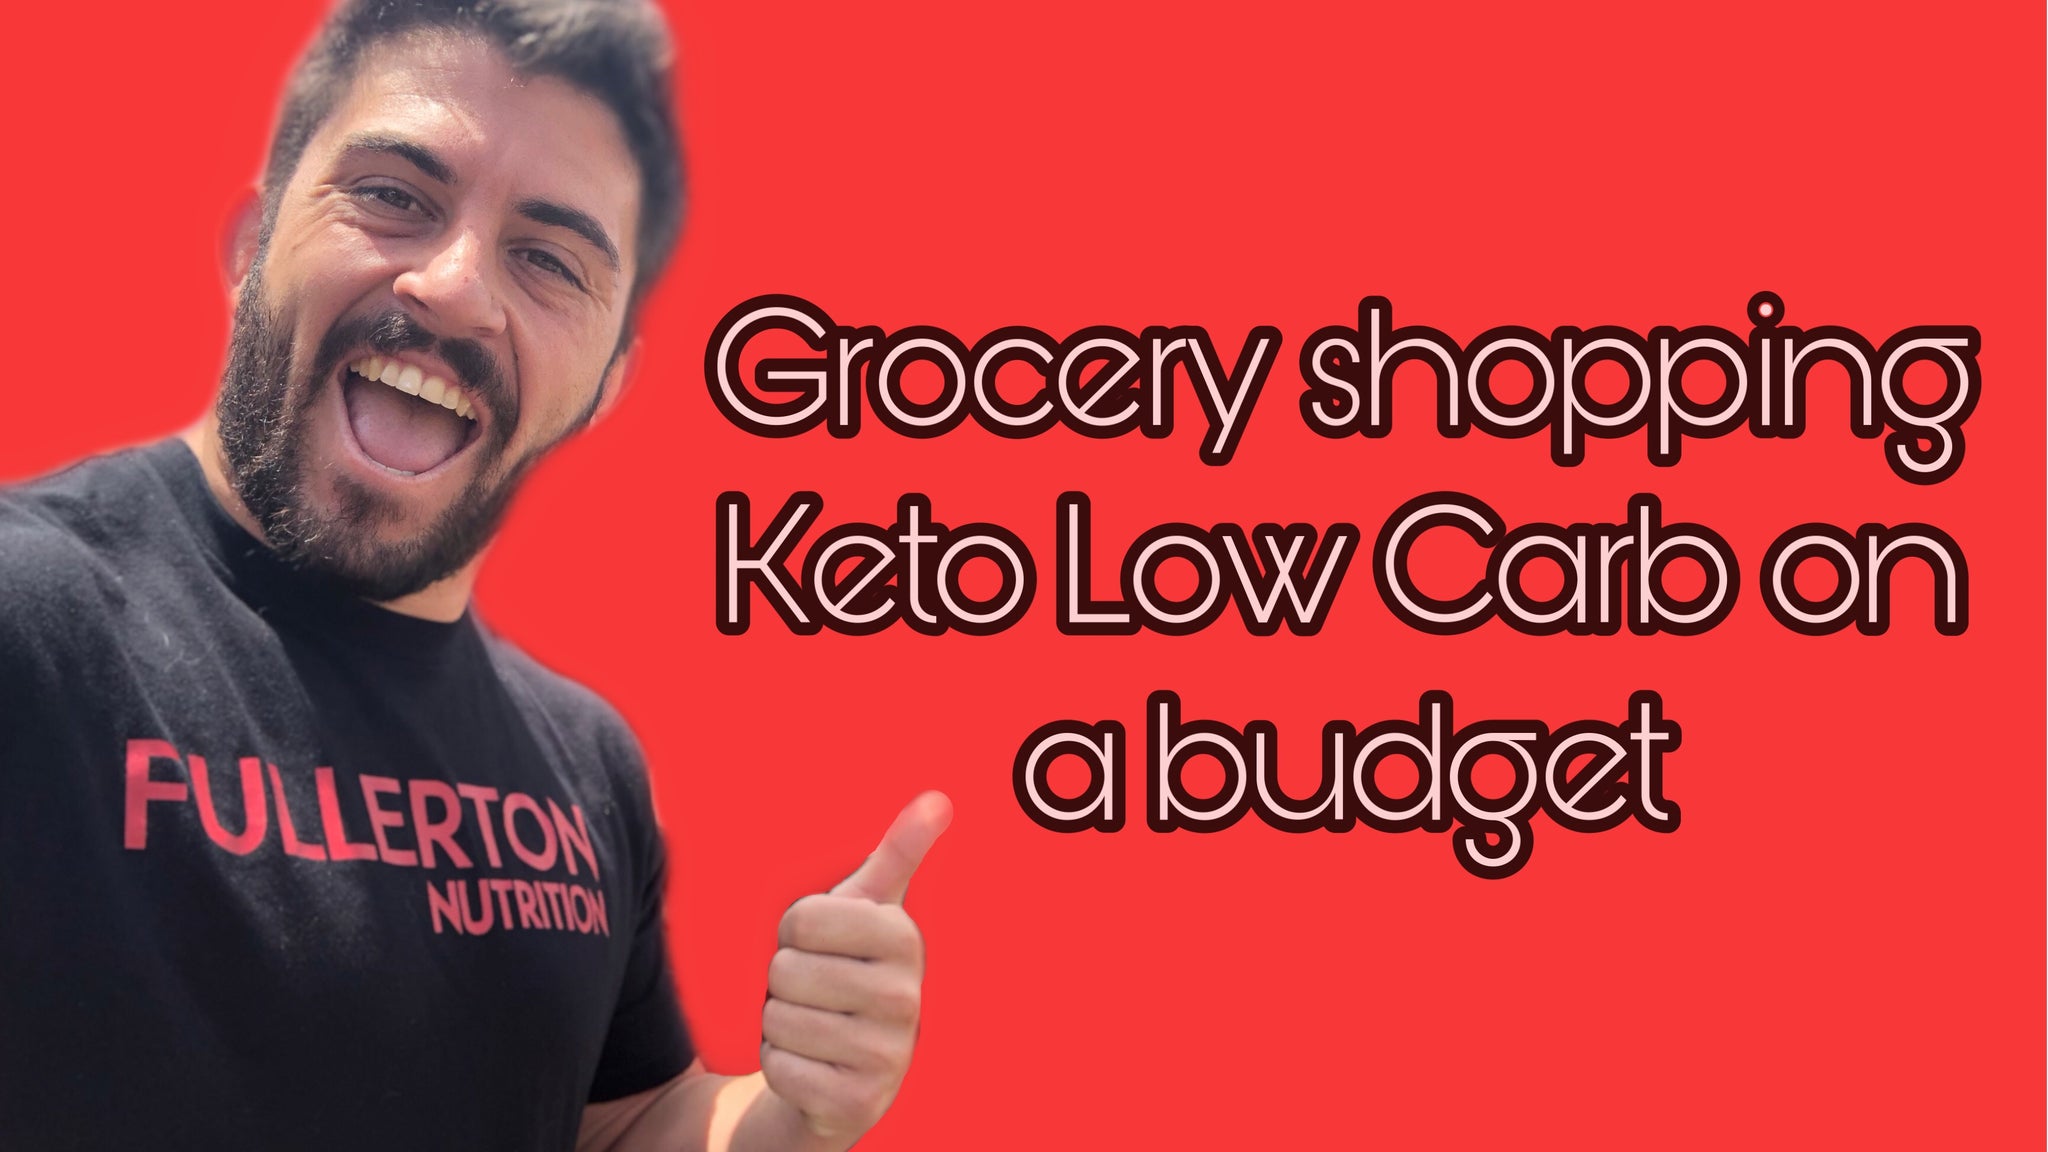 Eating Keto Low Carb on a budget: Grocery shopping tripe 14 Meals under $20